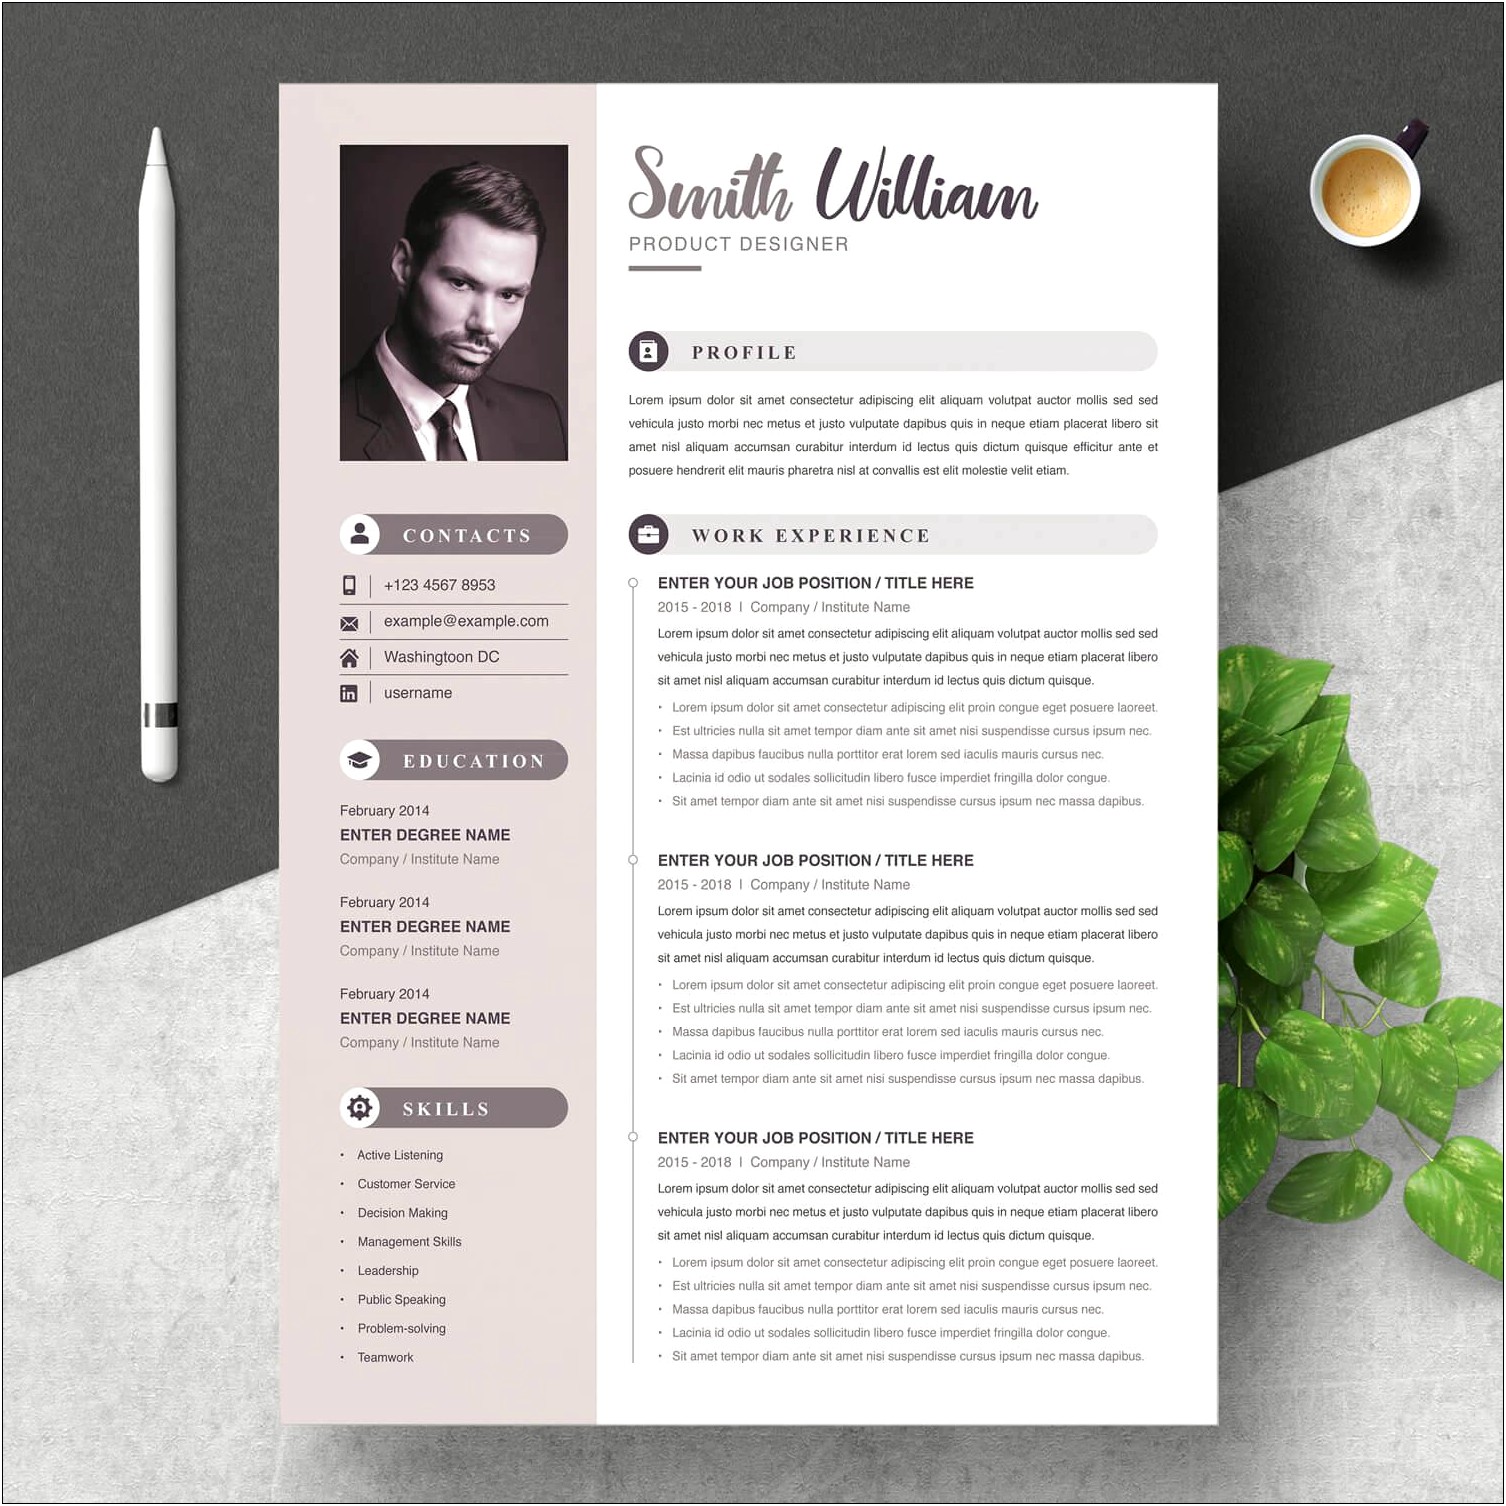 Customer Service Resume Template Free Download